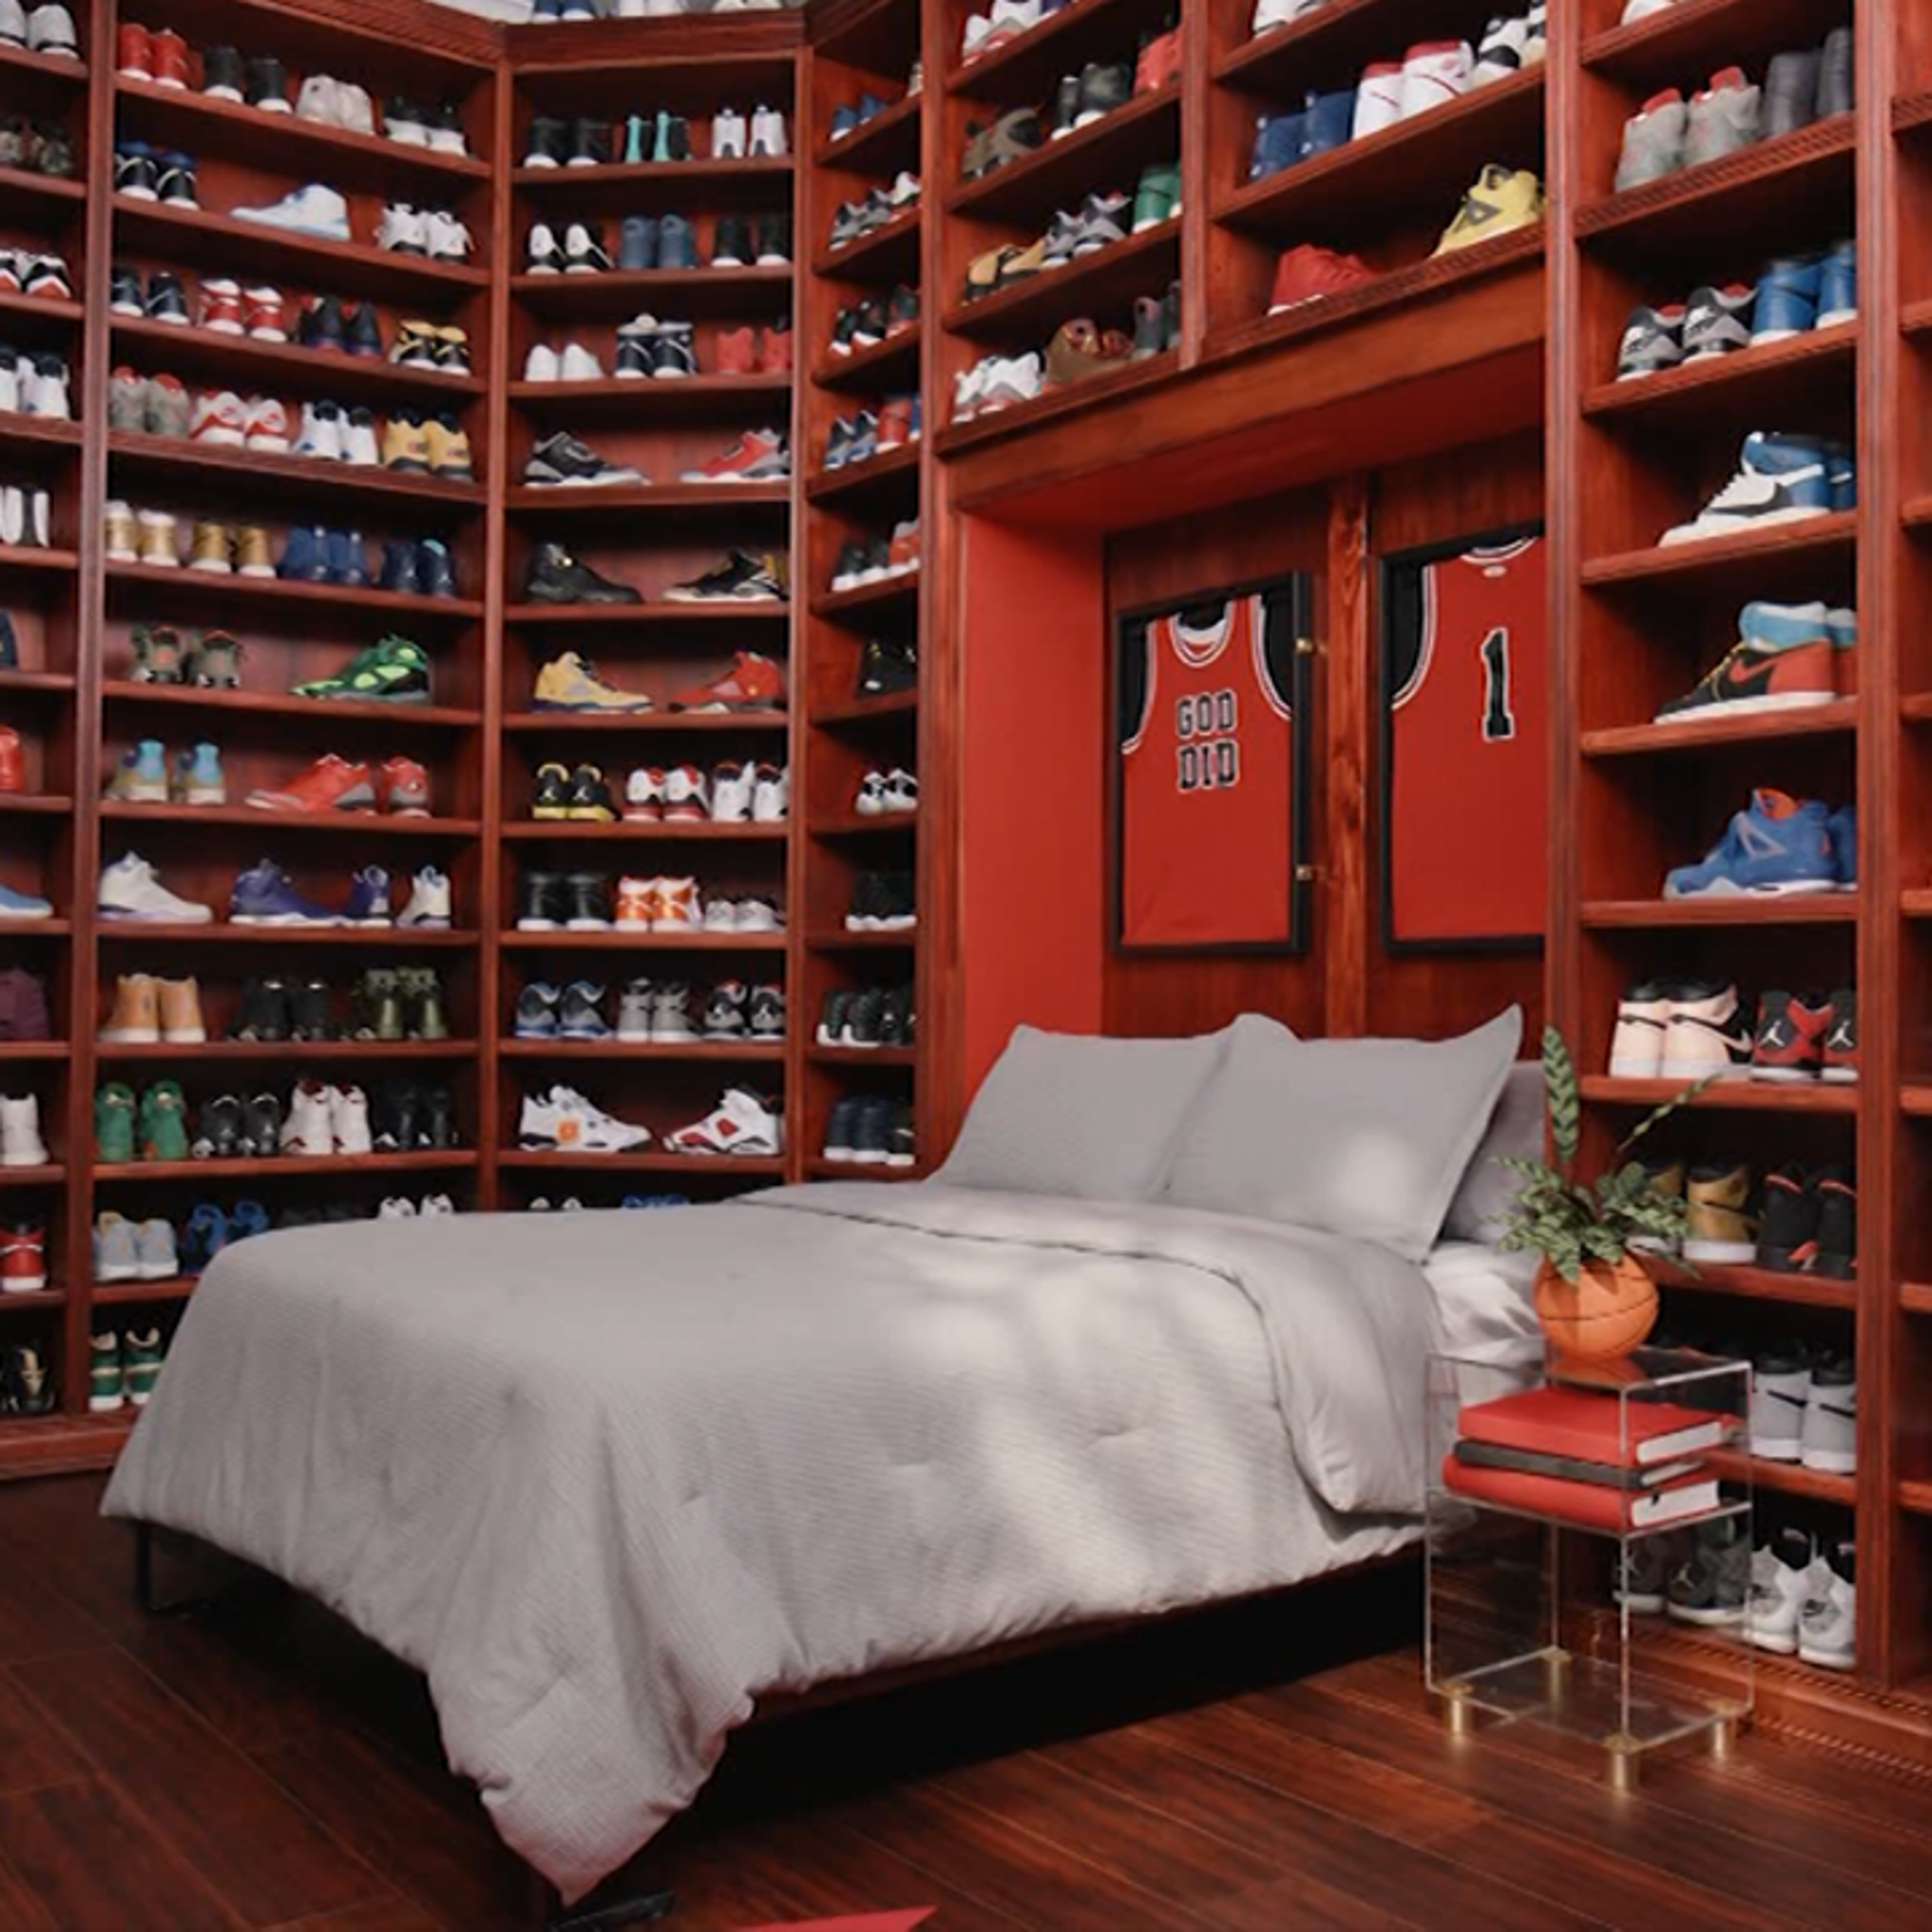 Sleep in DJ Khaled's Sneaker Room with Airbnb